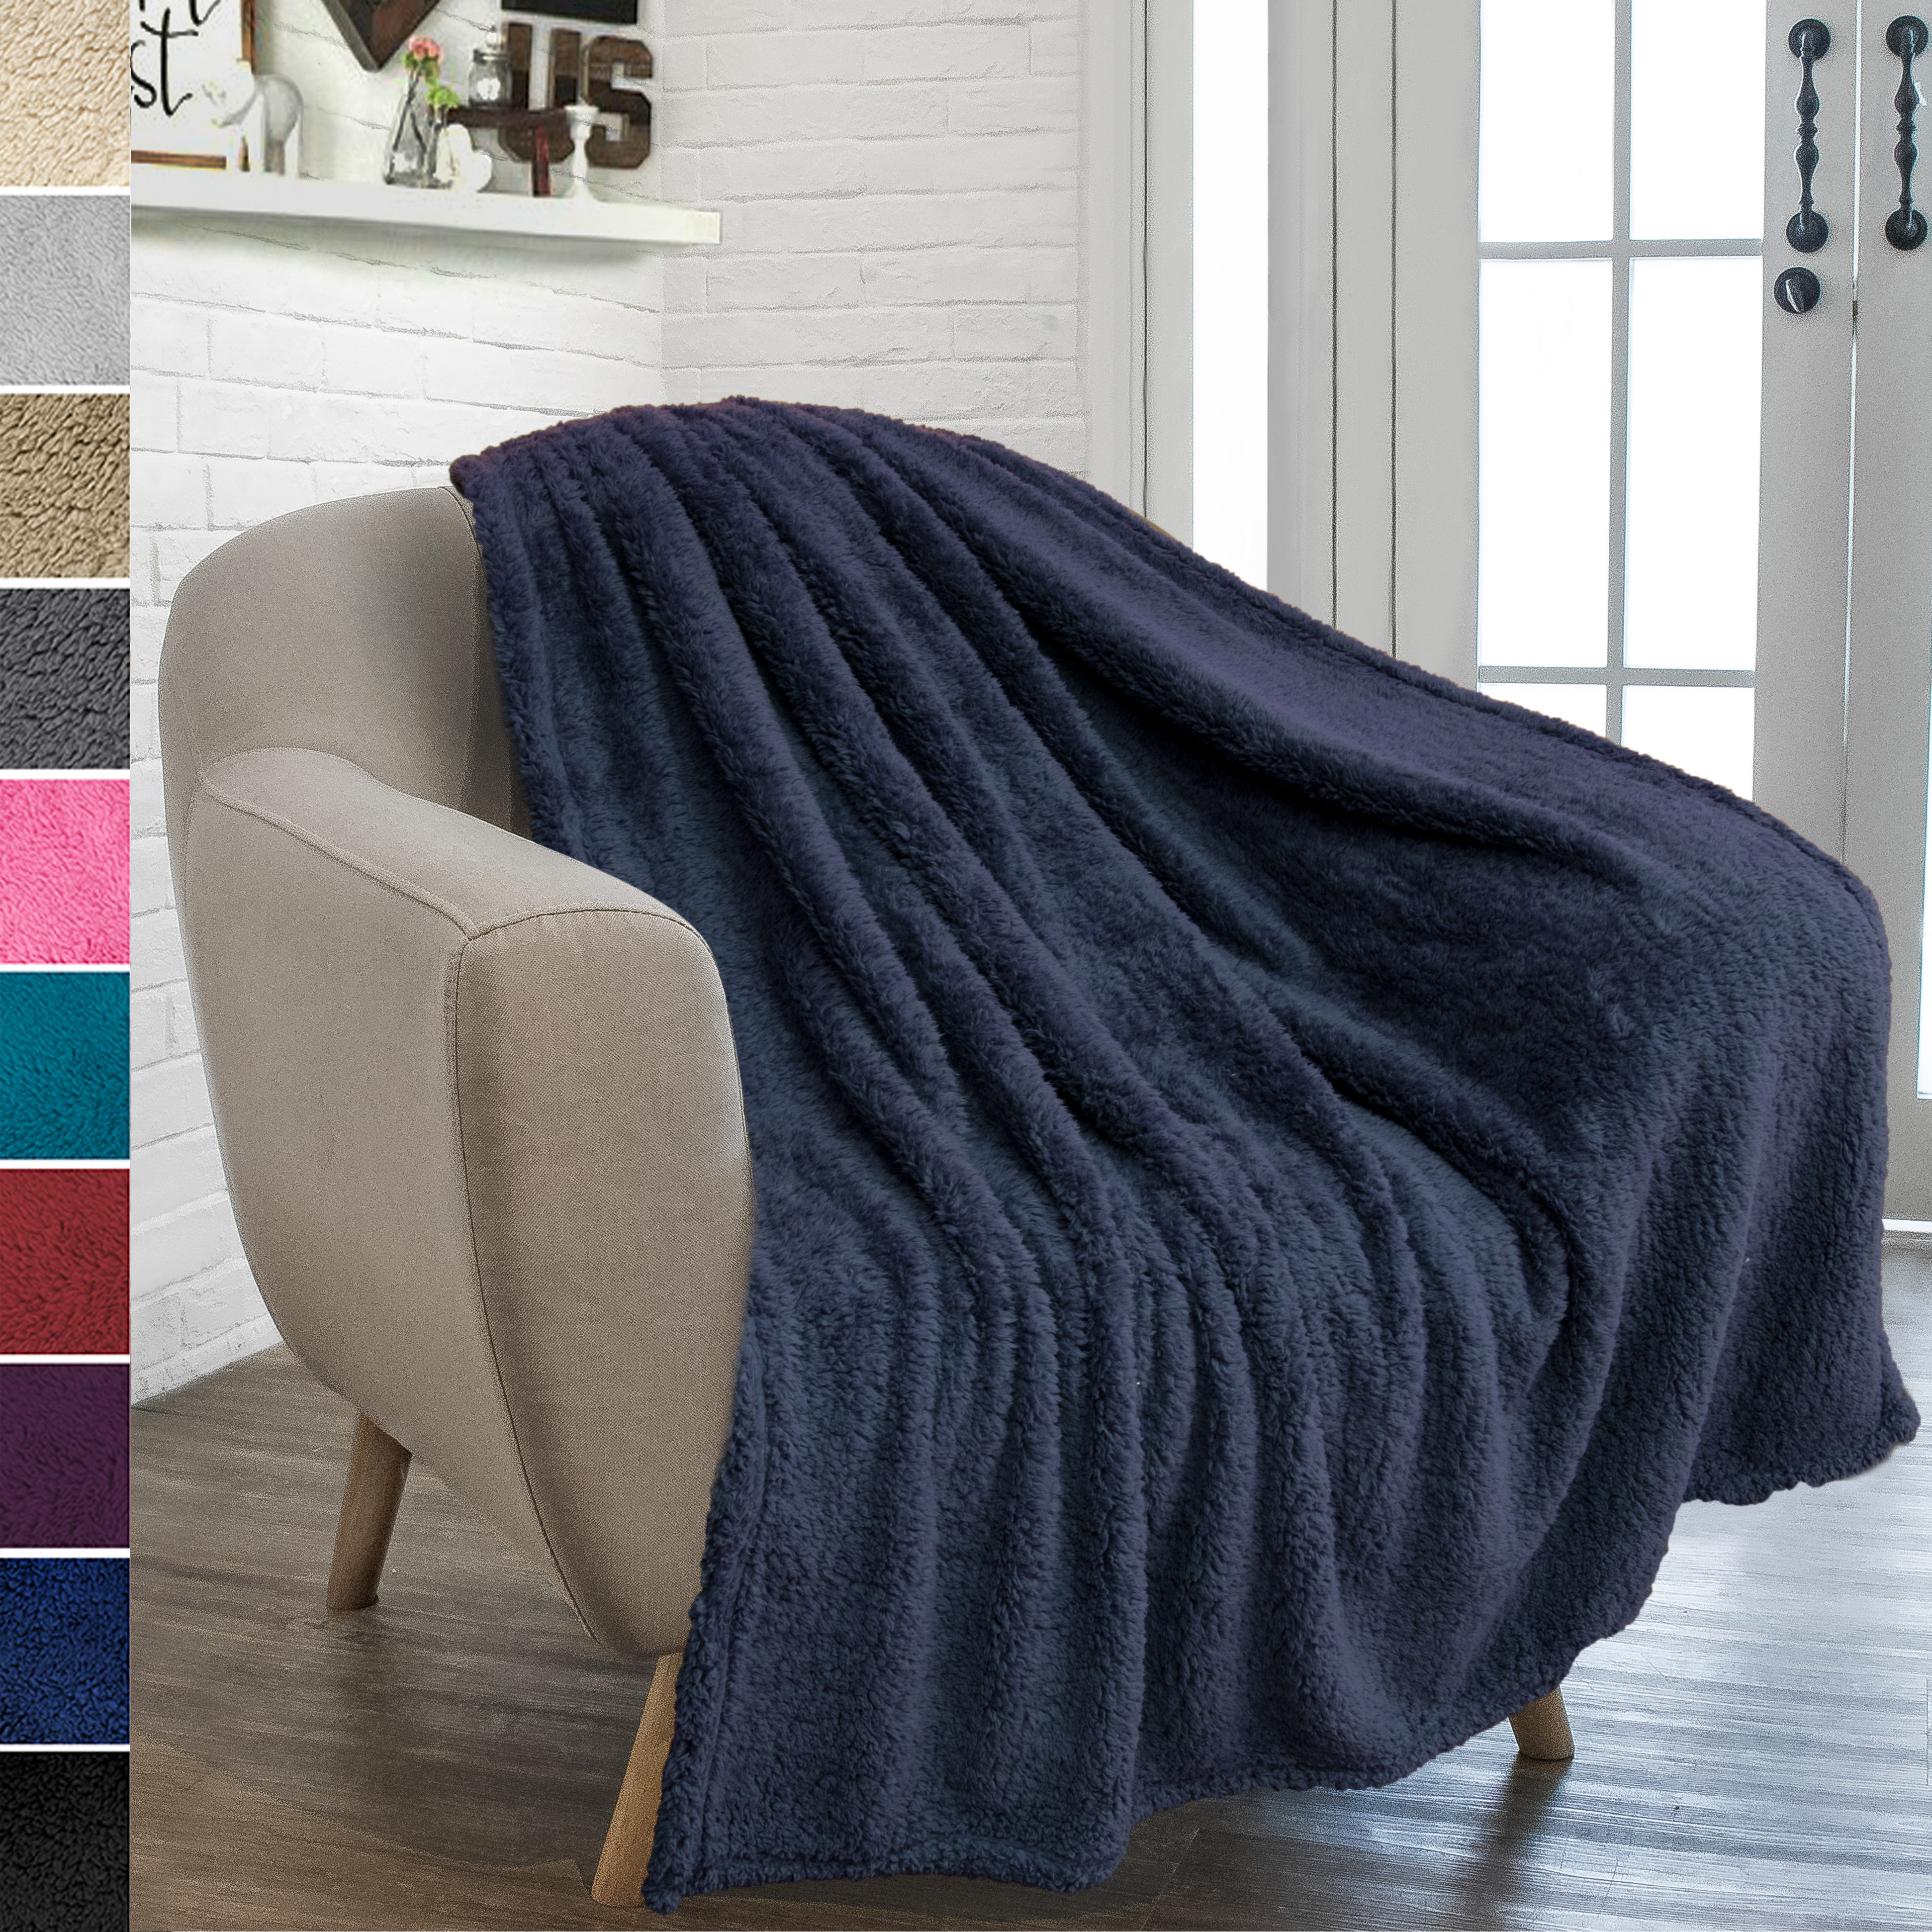 T&H XHome Sherpa Fleece Throw Blanket Cozy Soft Warm Bed Blankets,Plum Blossom Wall Shabby Fuzzy Plush Microfiber Lightweight Blankets All Season for Couch Sofa 50x80IN 